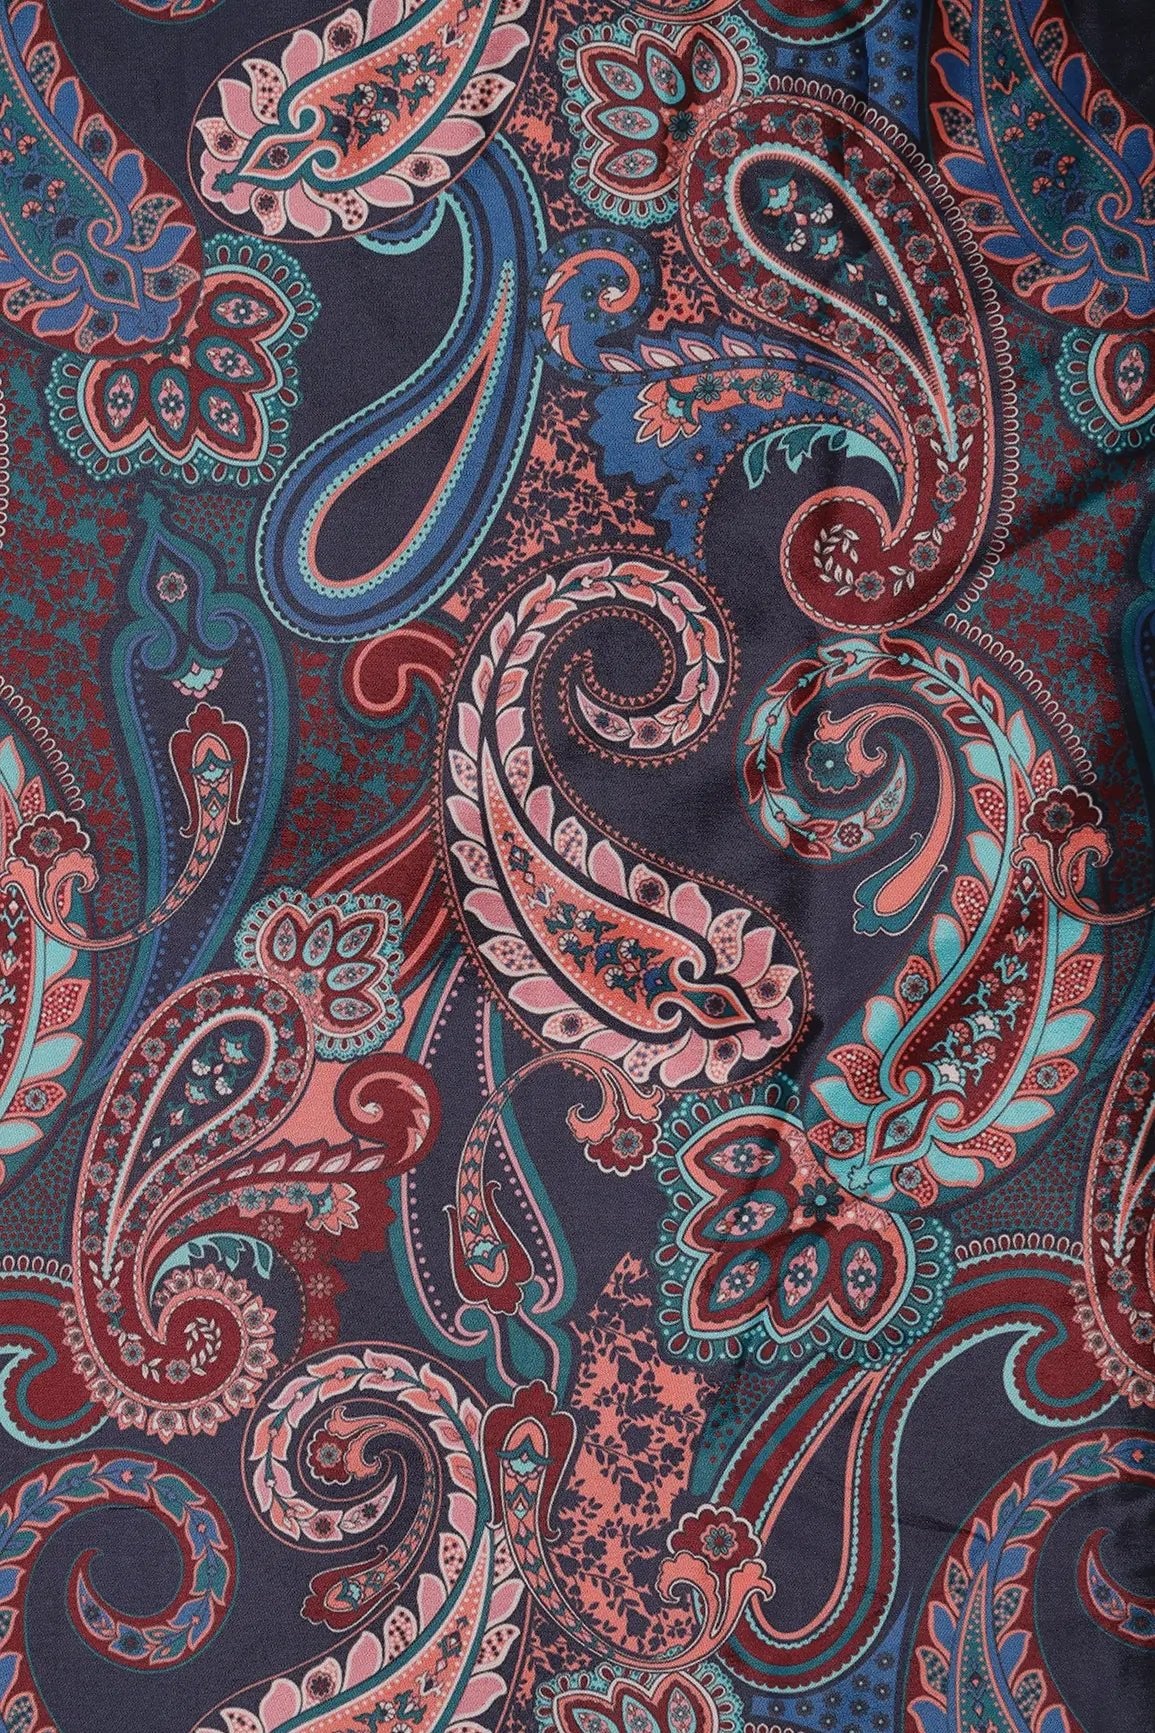 Multi Color Paisley Pattern Digital Print On French Crepe Fabric - doeraa